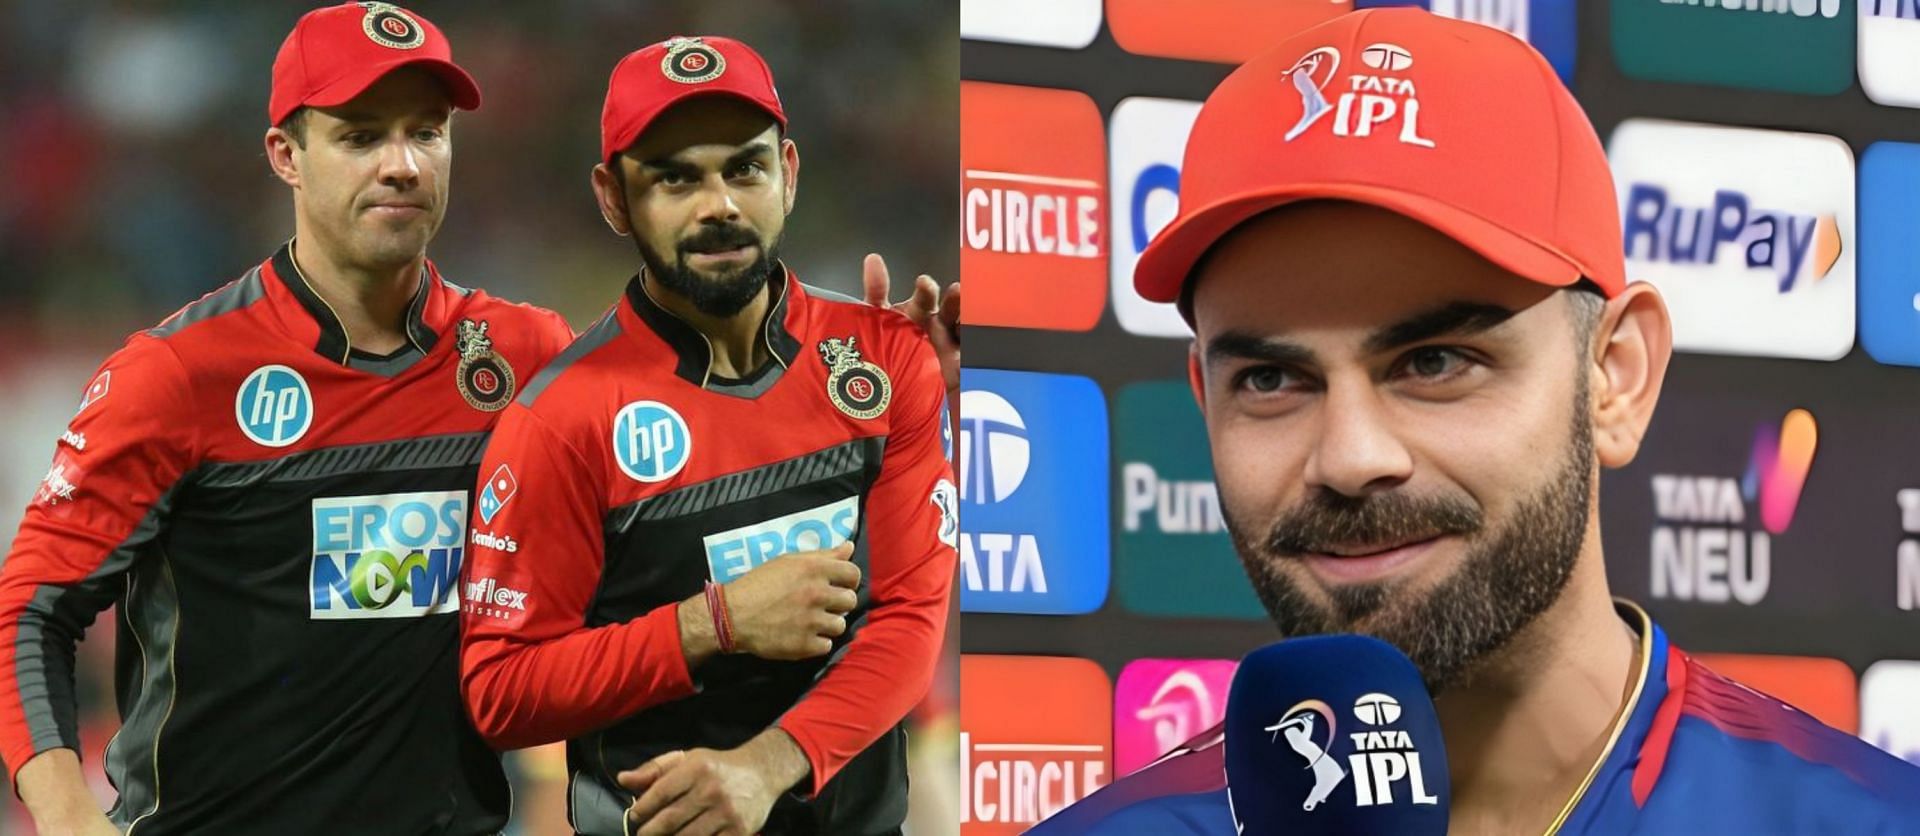 Former RCB player AB de Villiers has urged Virat Kohli to bat through the middle overs so that the team can fire from all cylinders when a player of his calibre stays at the crease for a longer duration of the innings